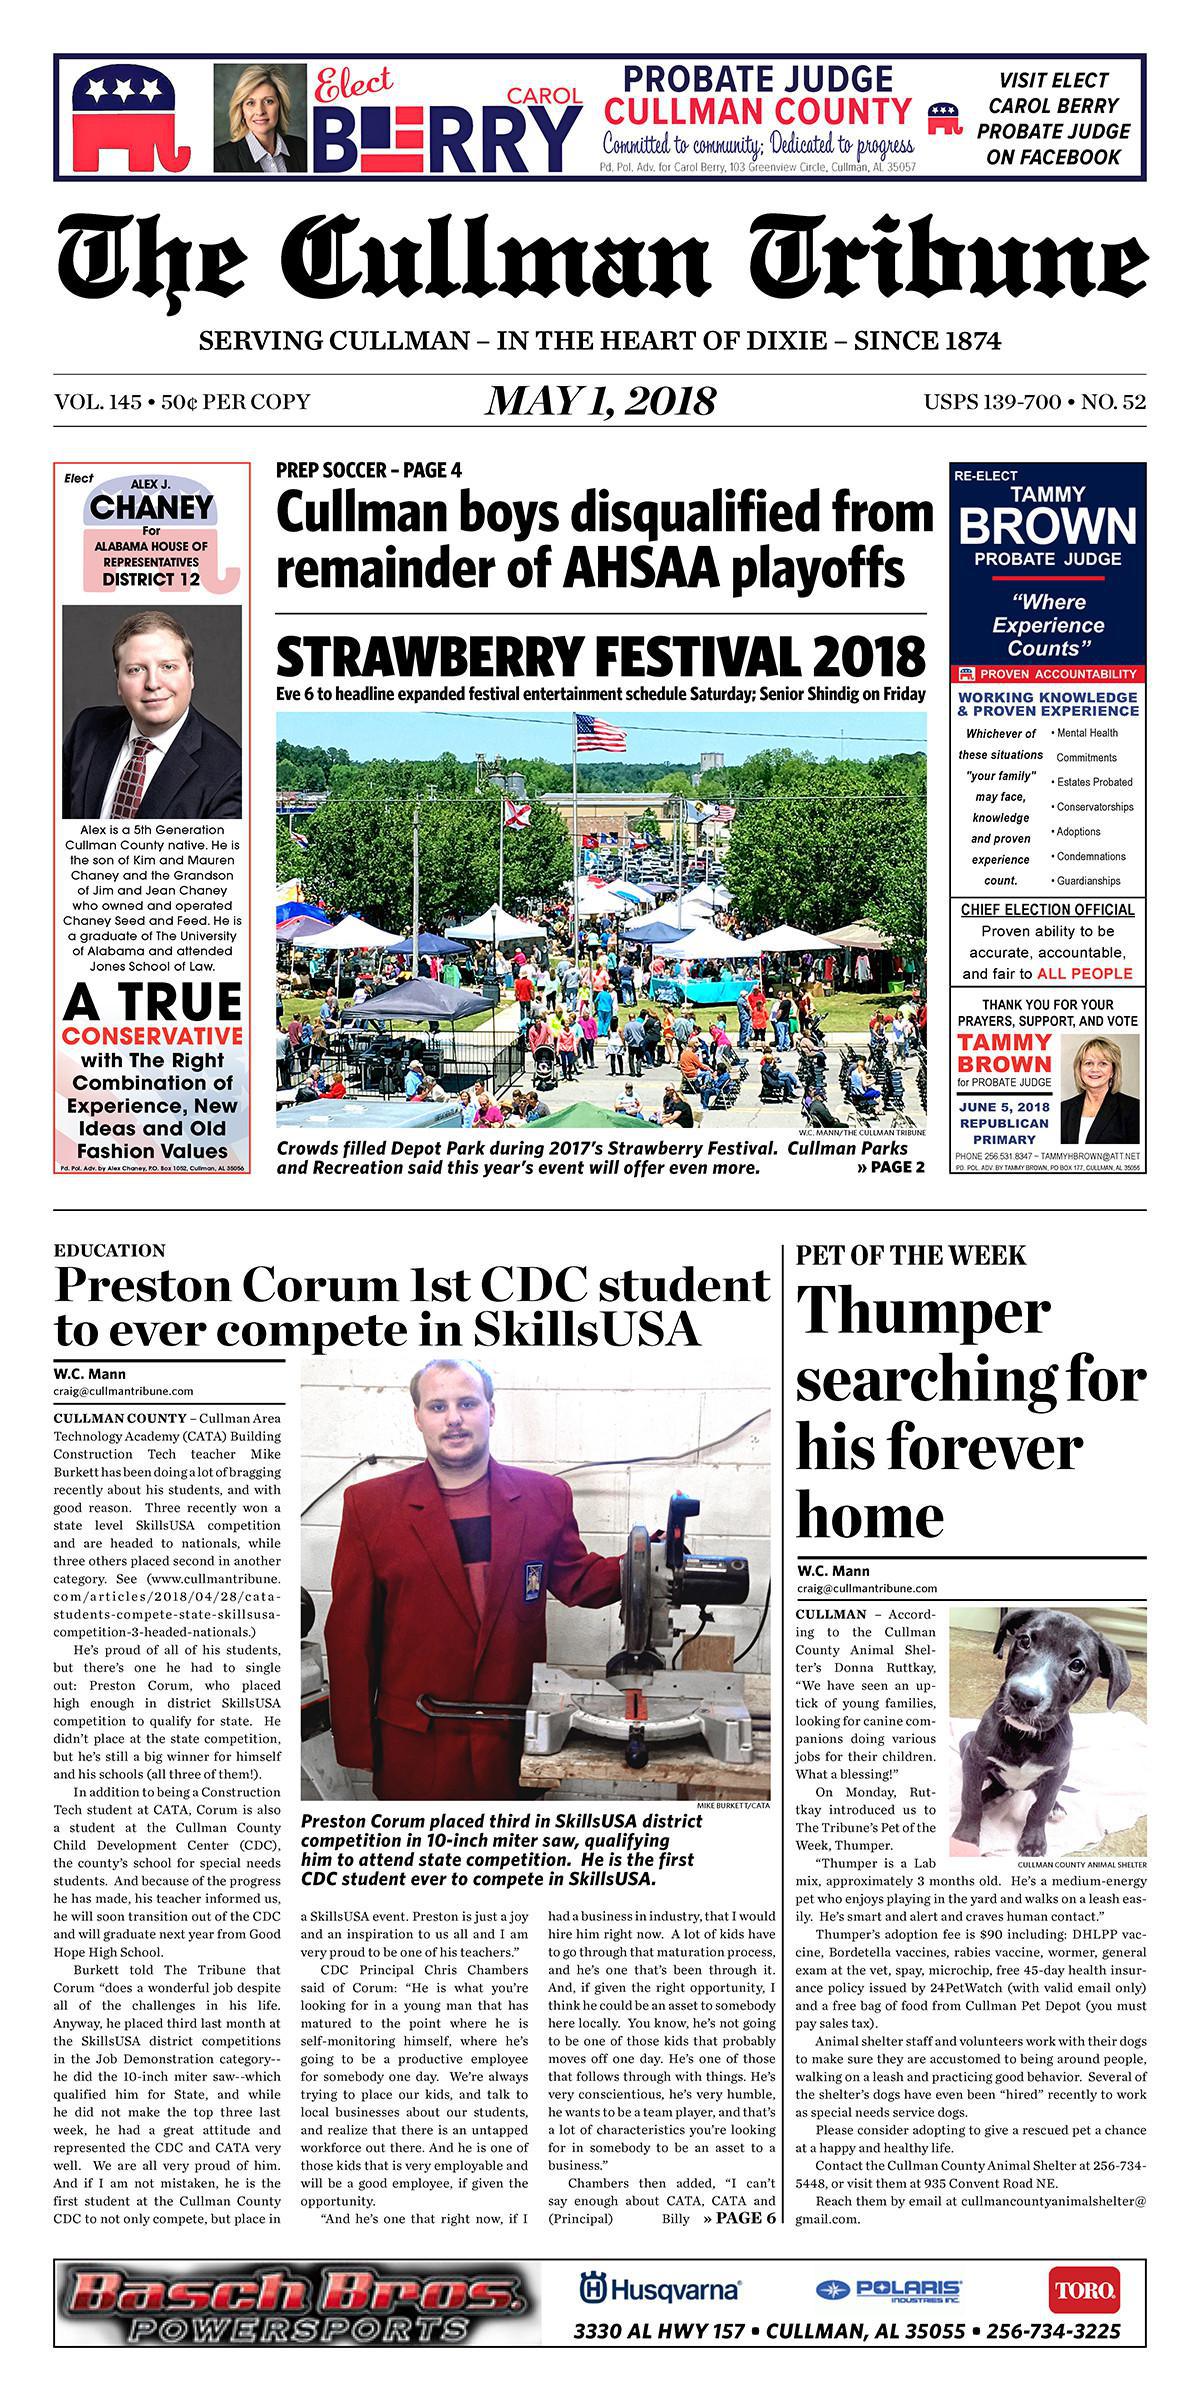 Good Morning Cullman! The 05-01-2018 edition of the Cullman Tribune is now ready to view